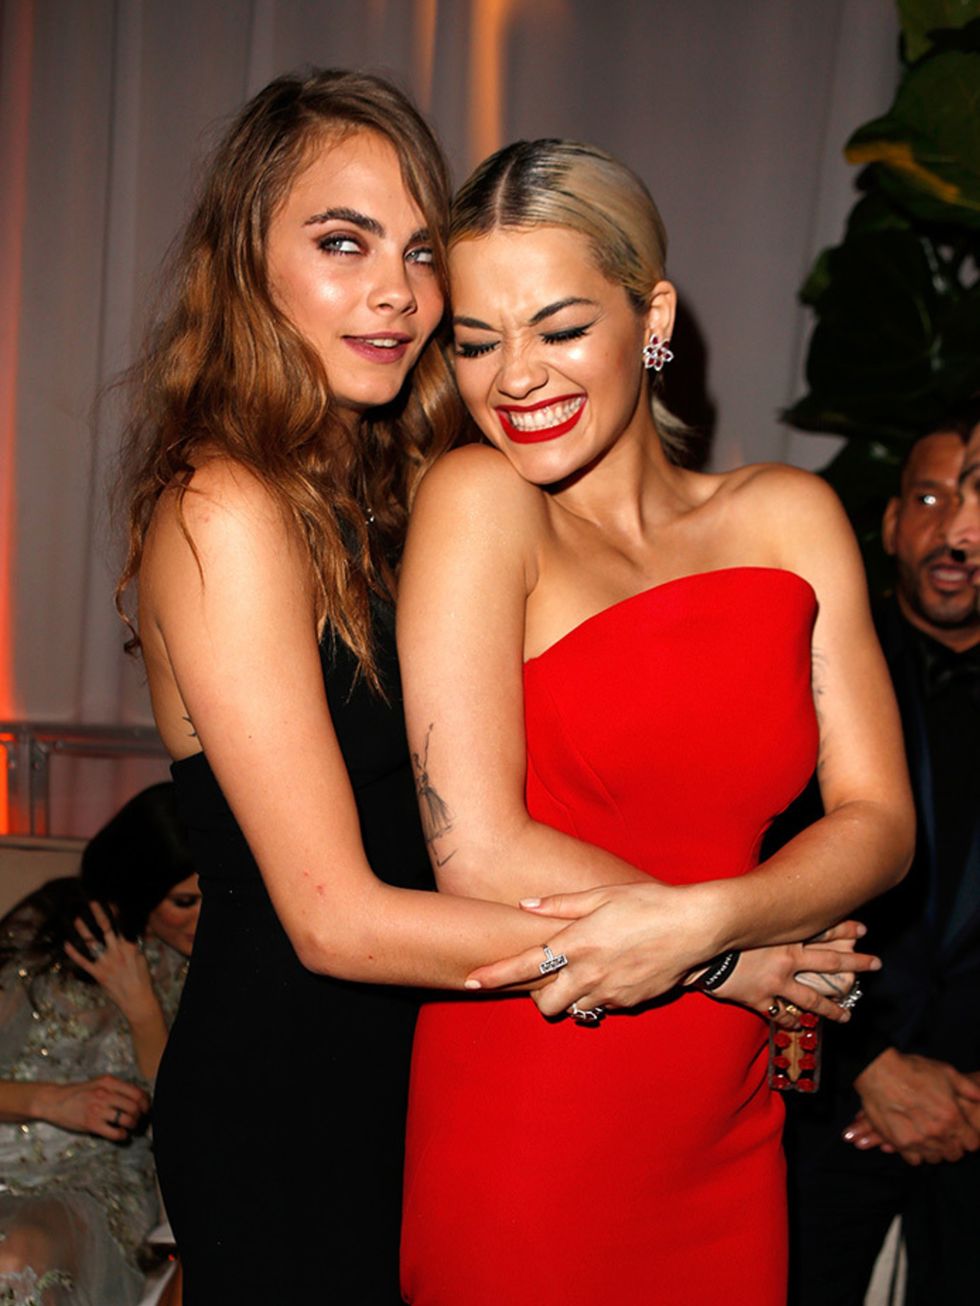 Cara Delevingne and Rita Ora attend the Weinstein Company and Netflix's 72nd annual Golden Globe after-party, January 2015.